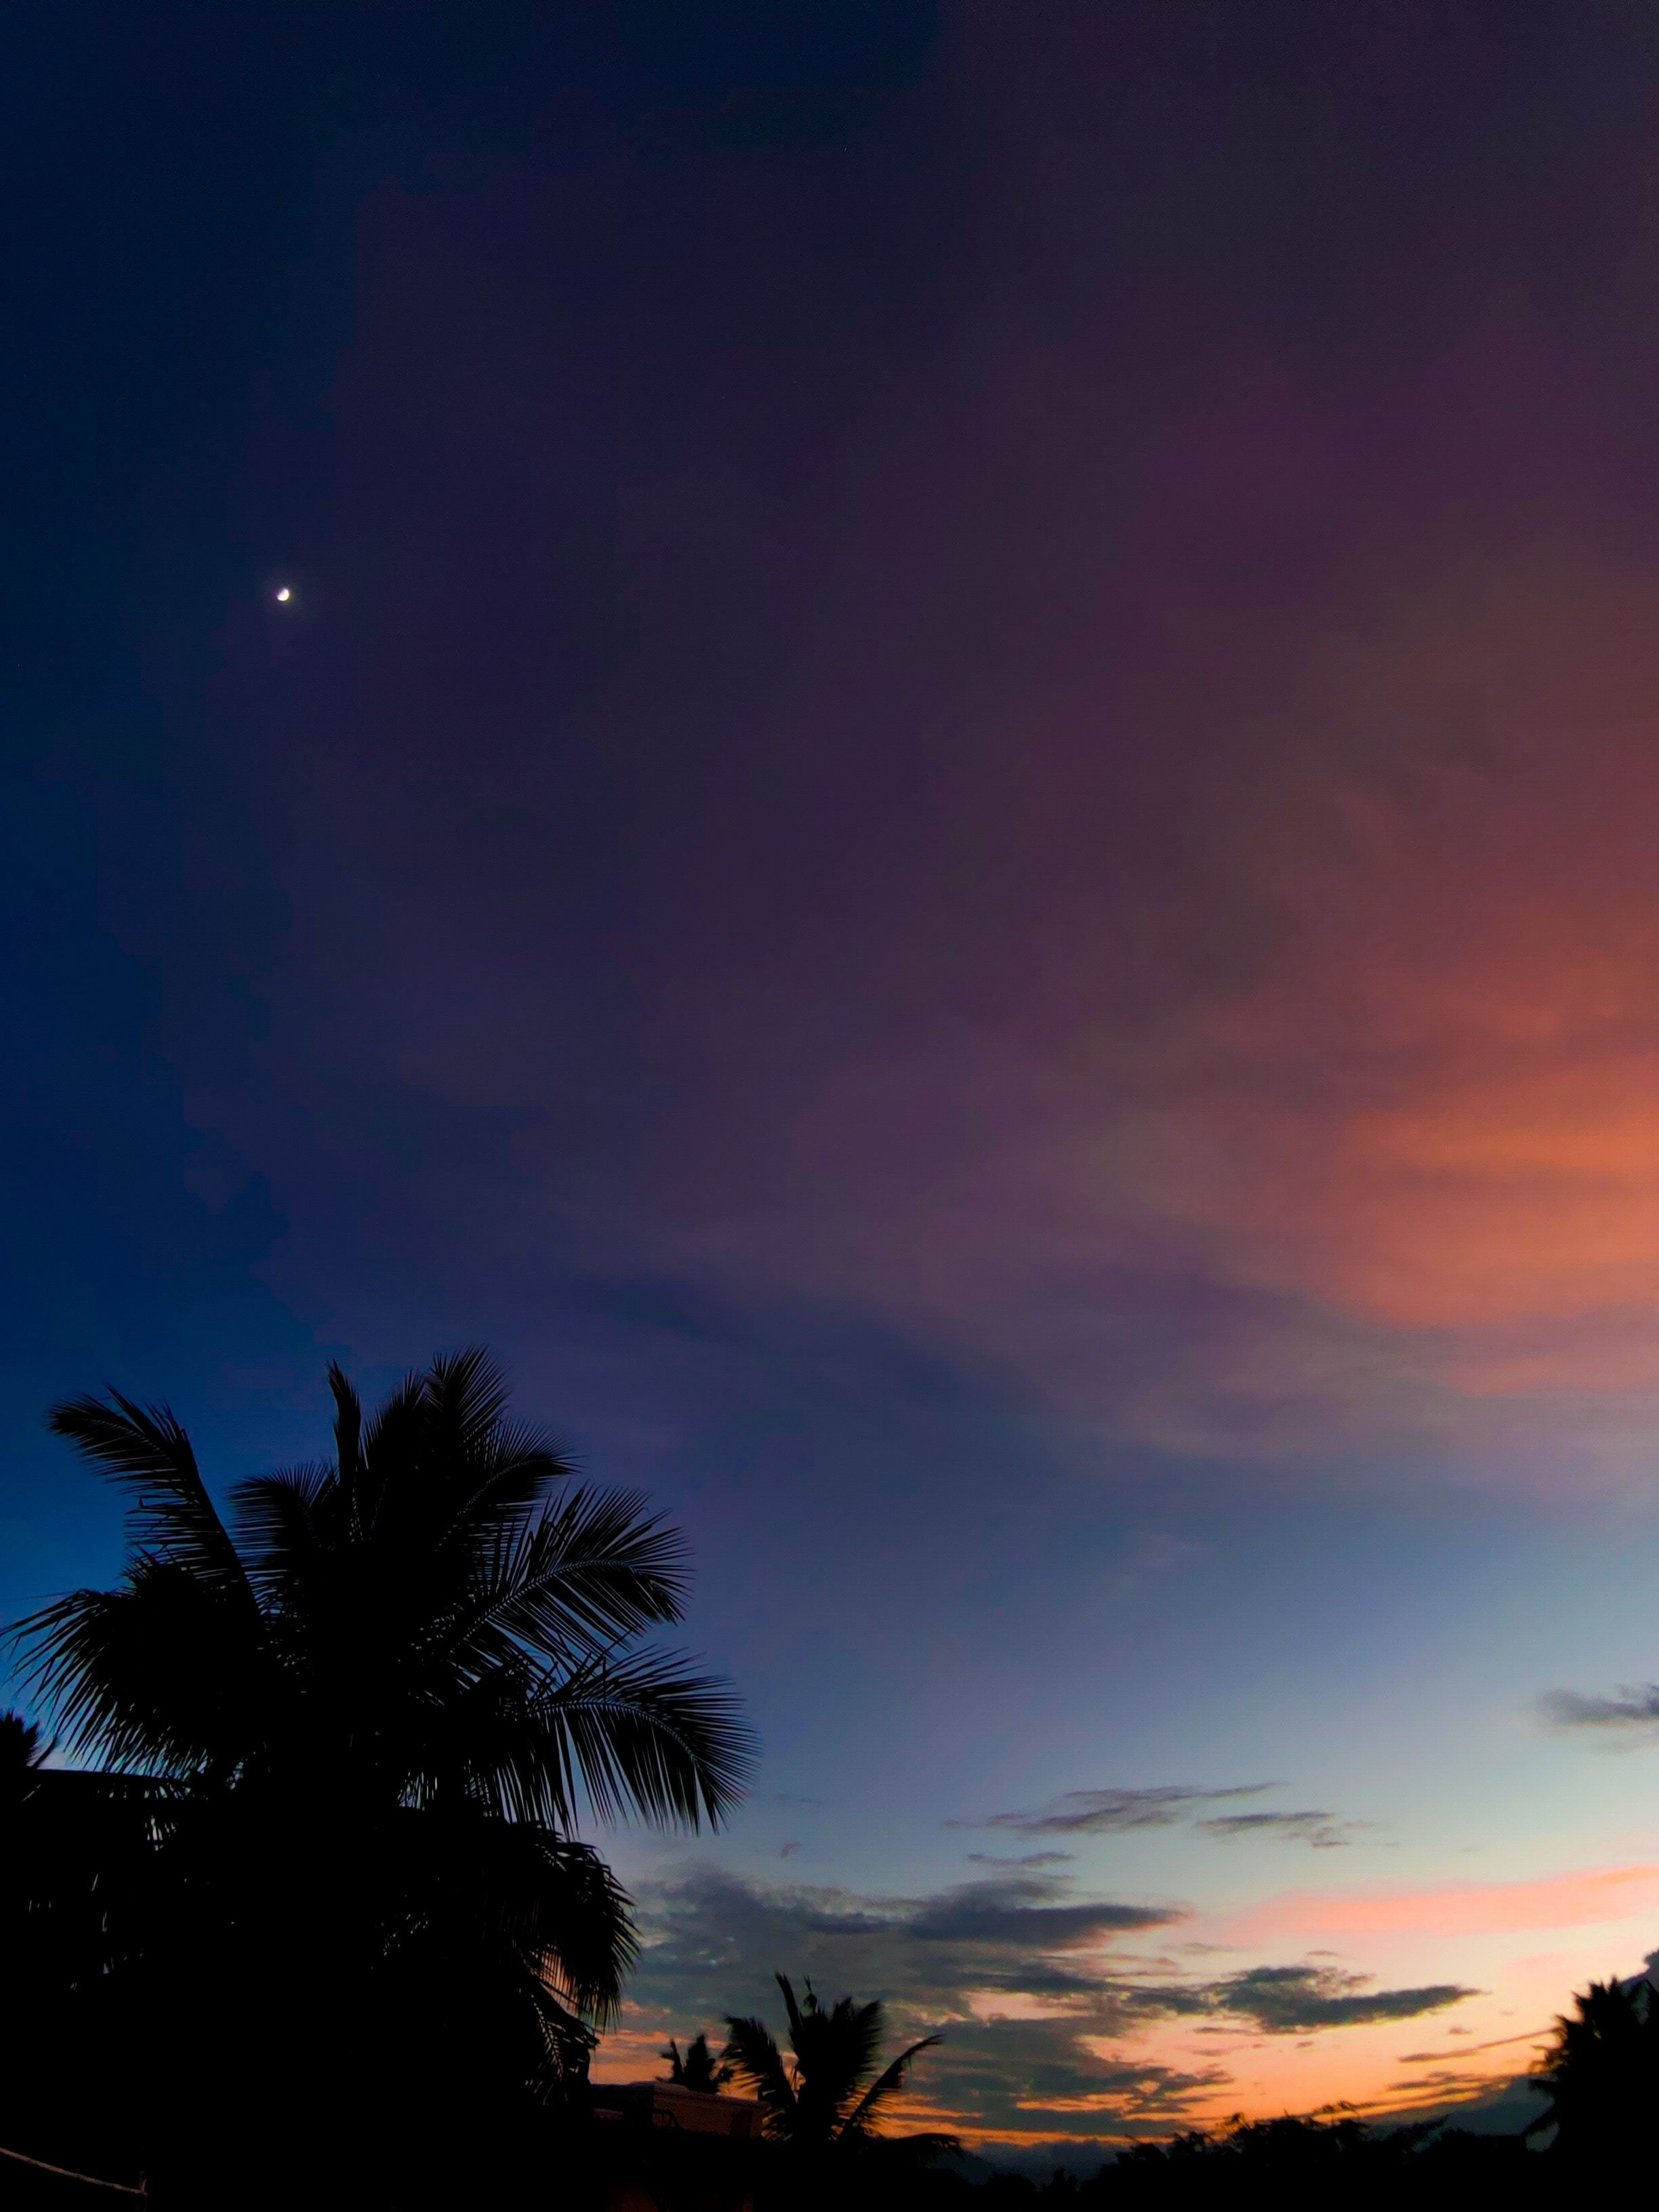 android night, sunset, nature, clouds, palm, tropics